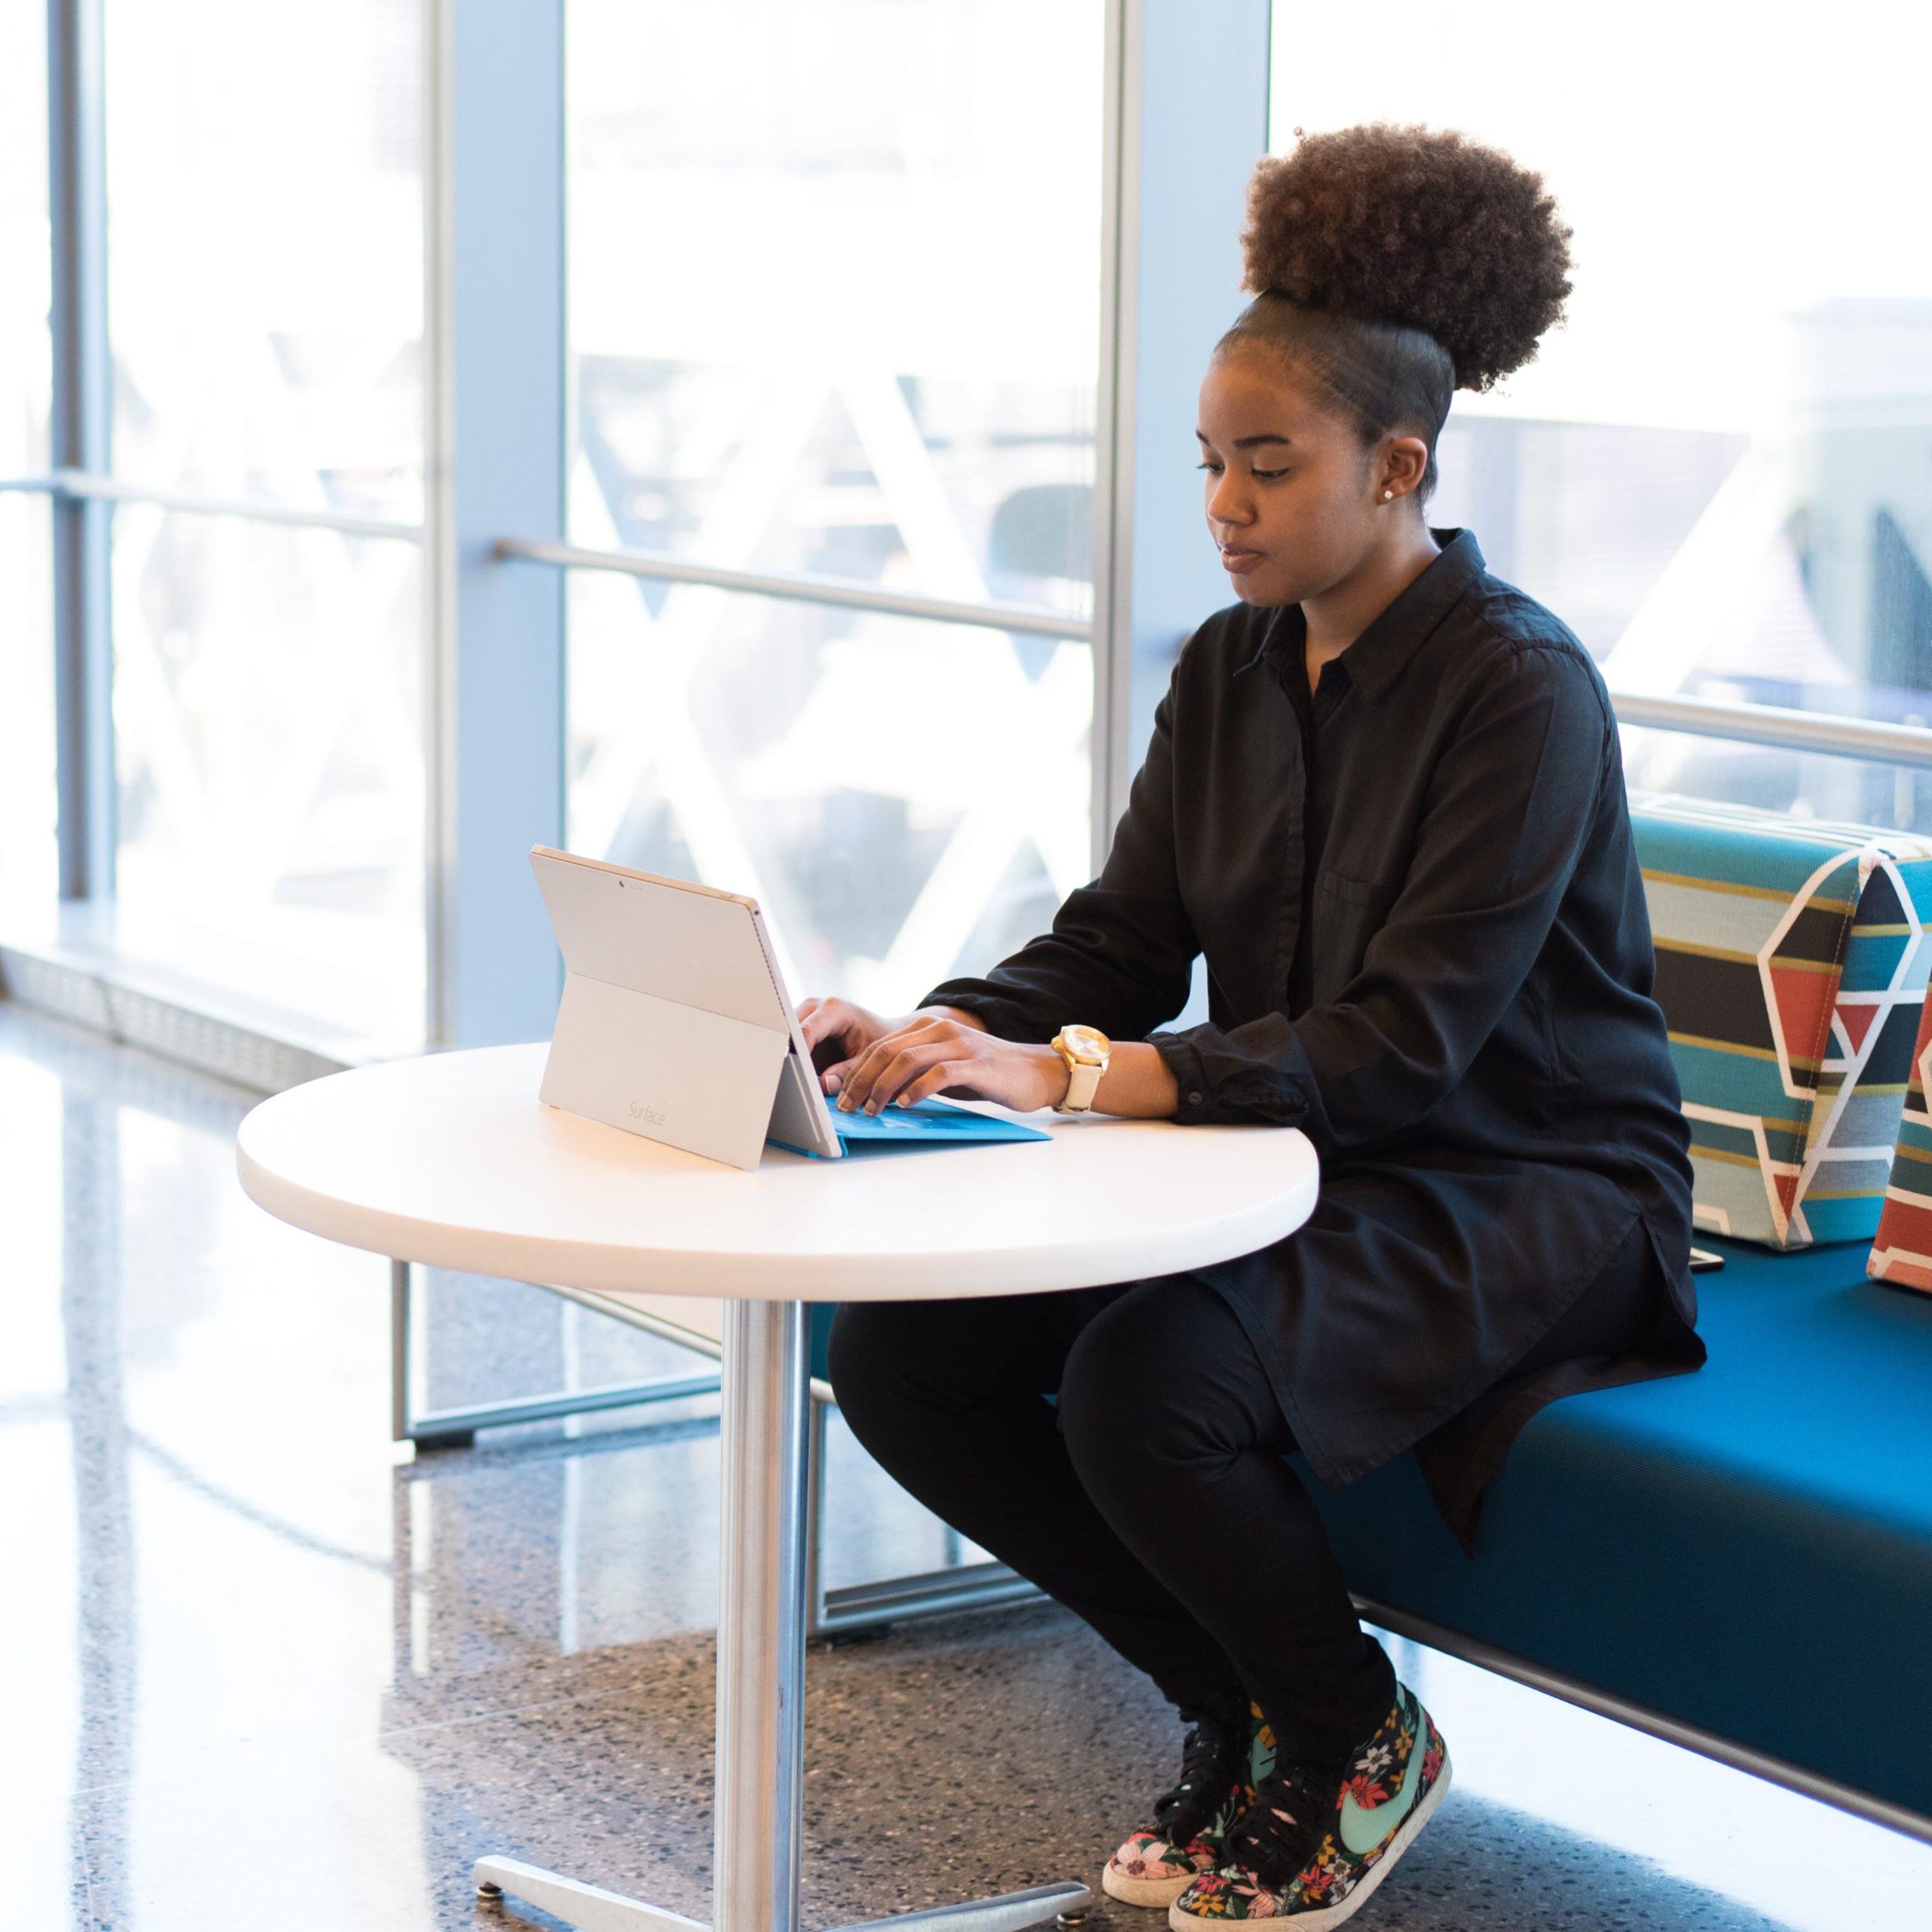 Black woman with black jacket and colorful sneakers sits at a bench working on her laptop.